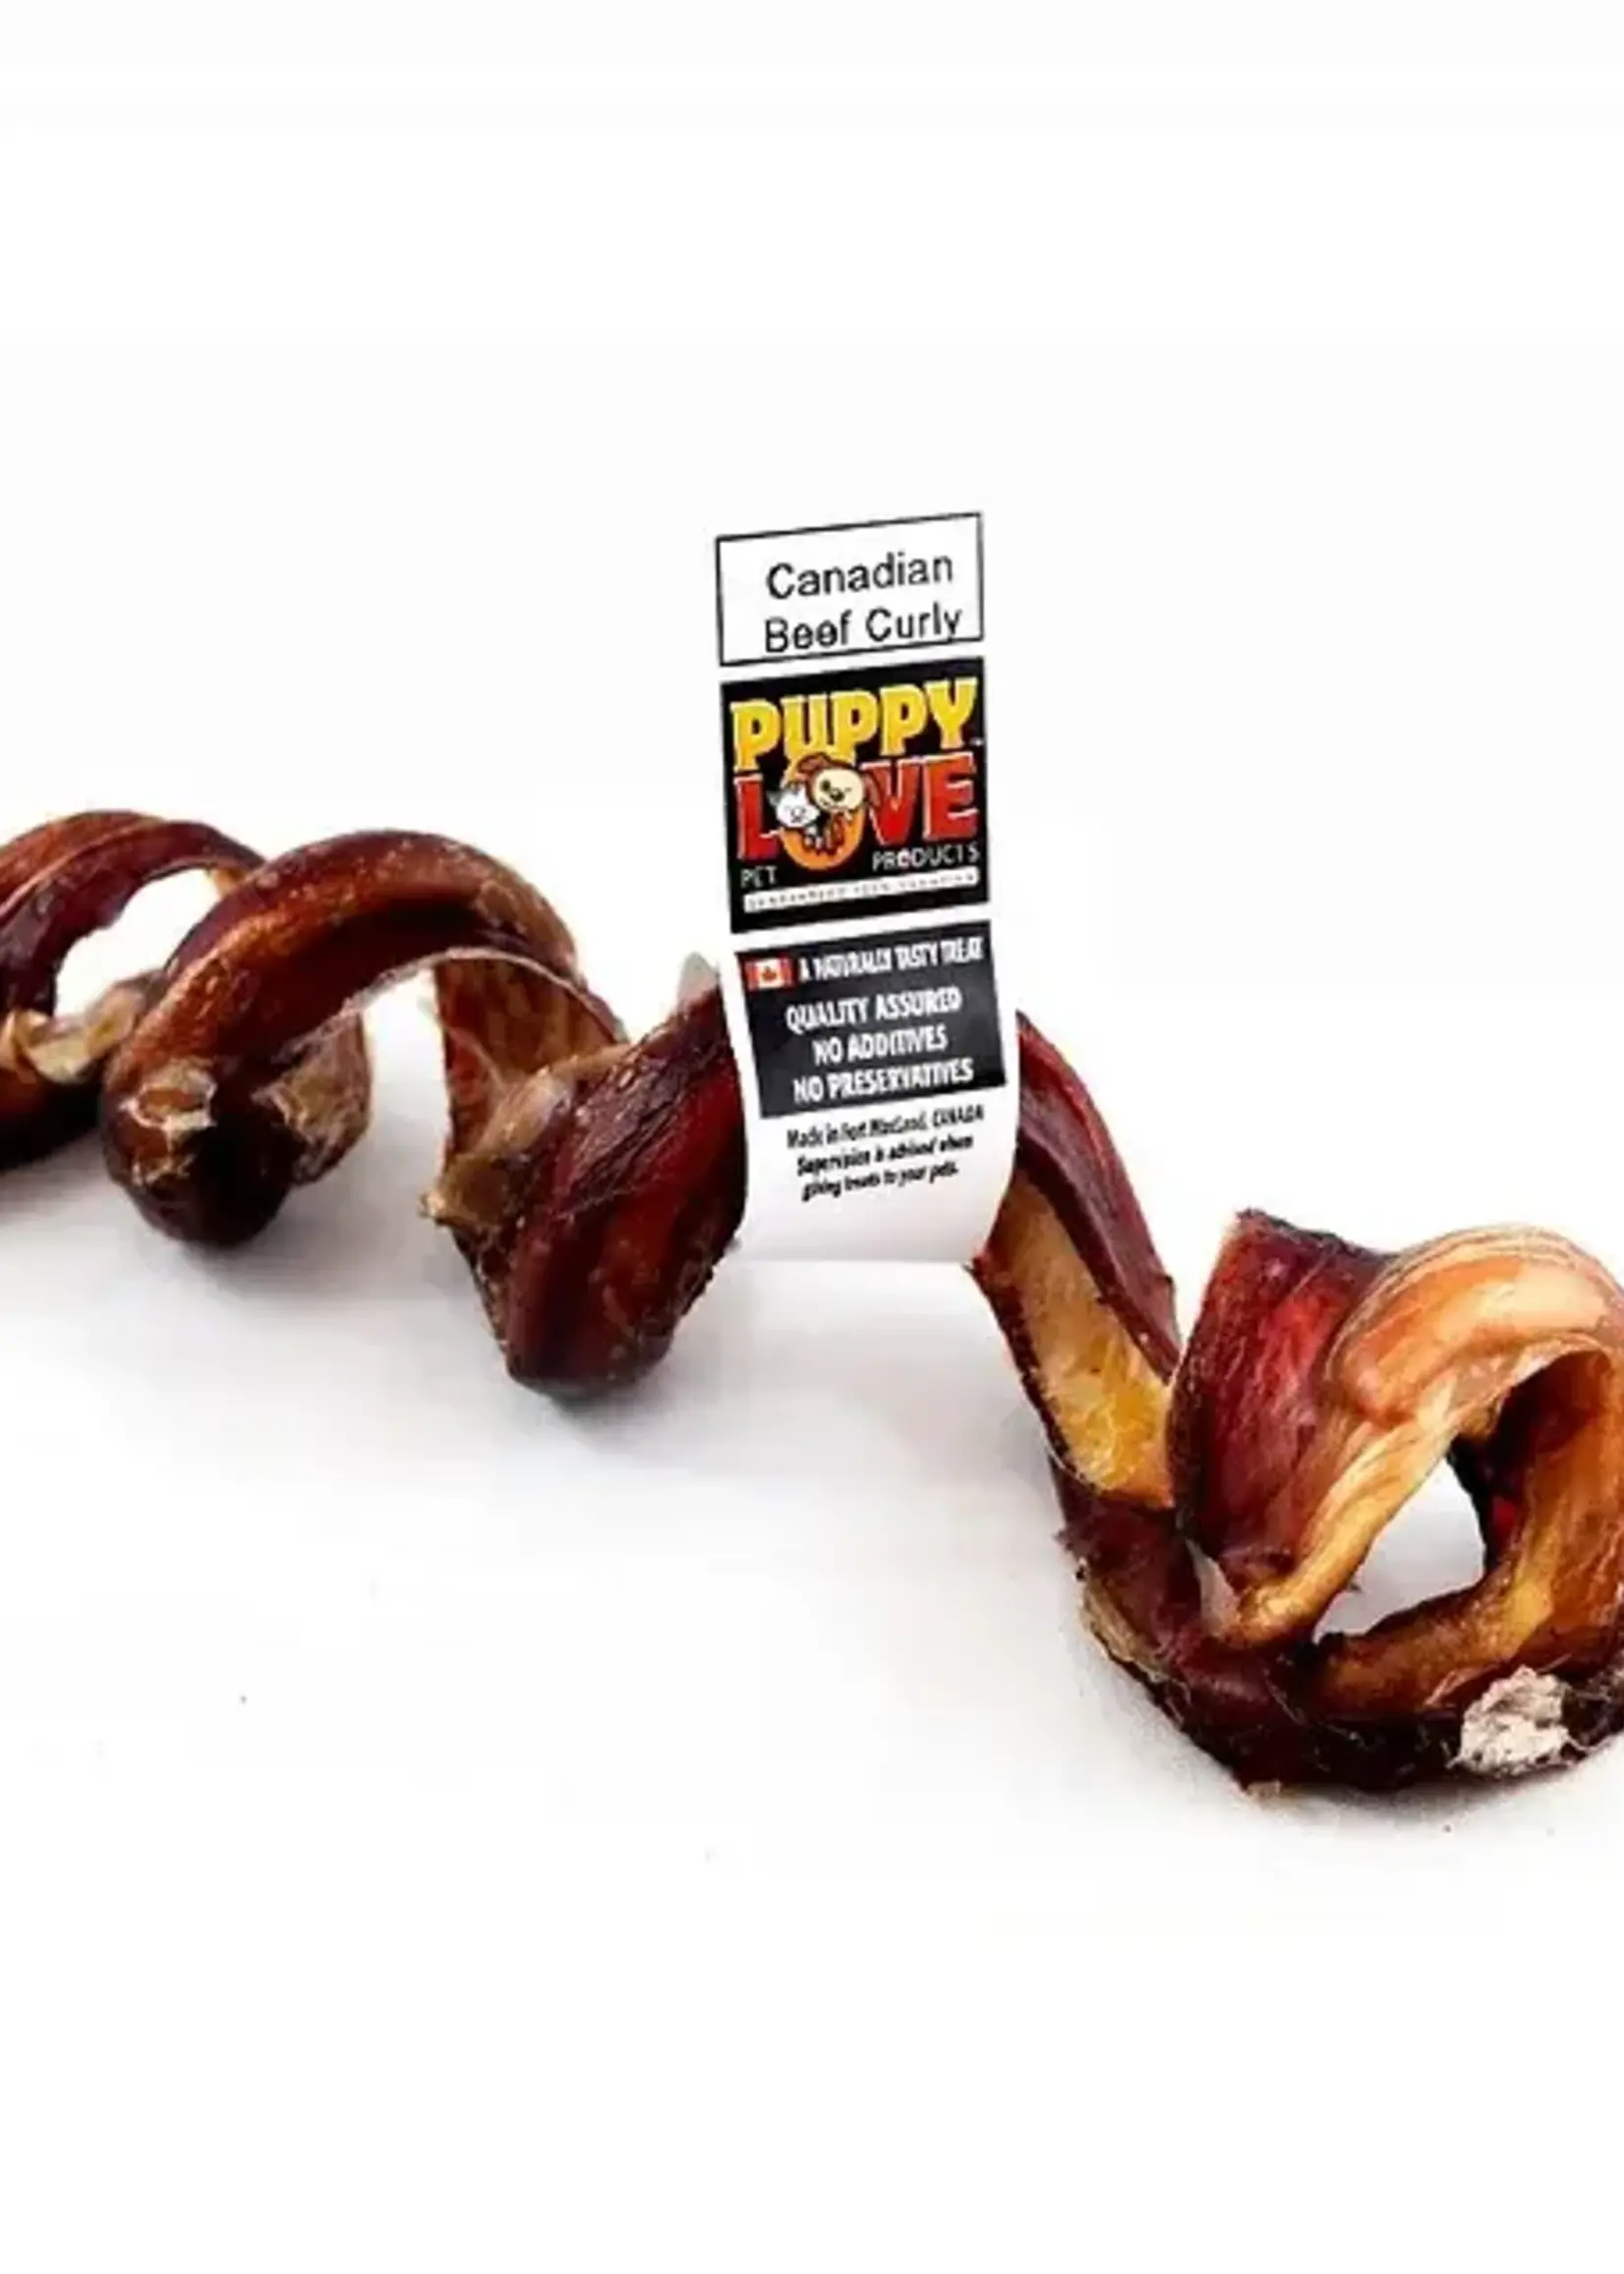 PUPPY LOVE PET PRODUCTS Puppy Love - Canadian Beef Curly - 5 Pack